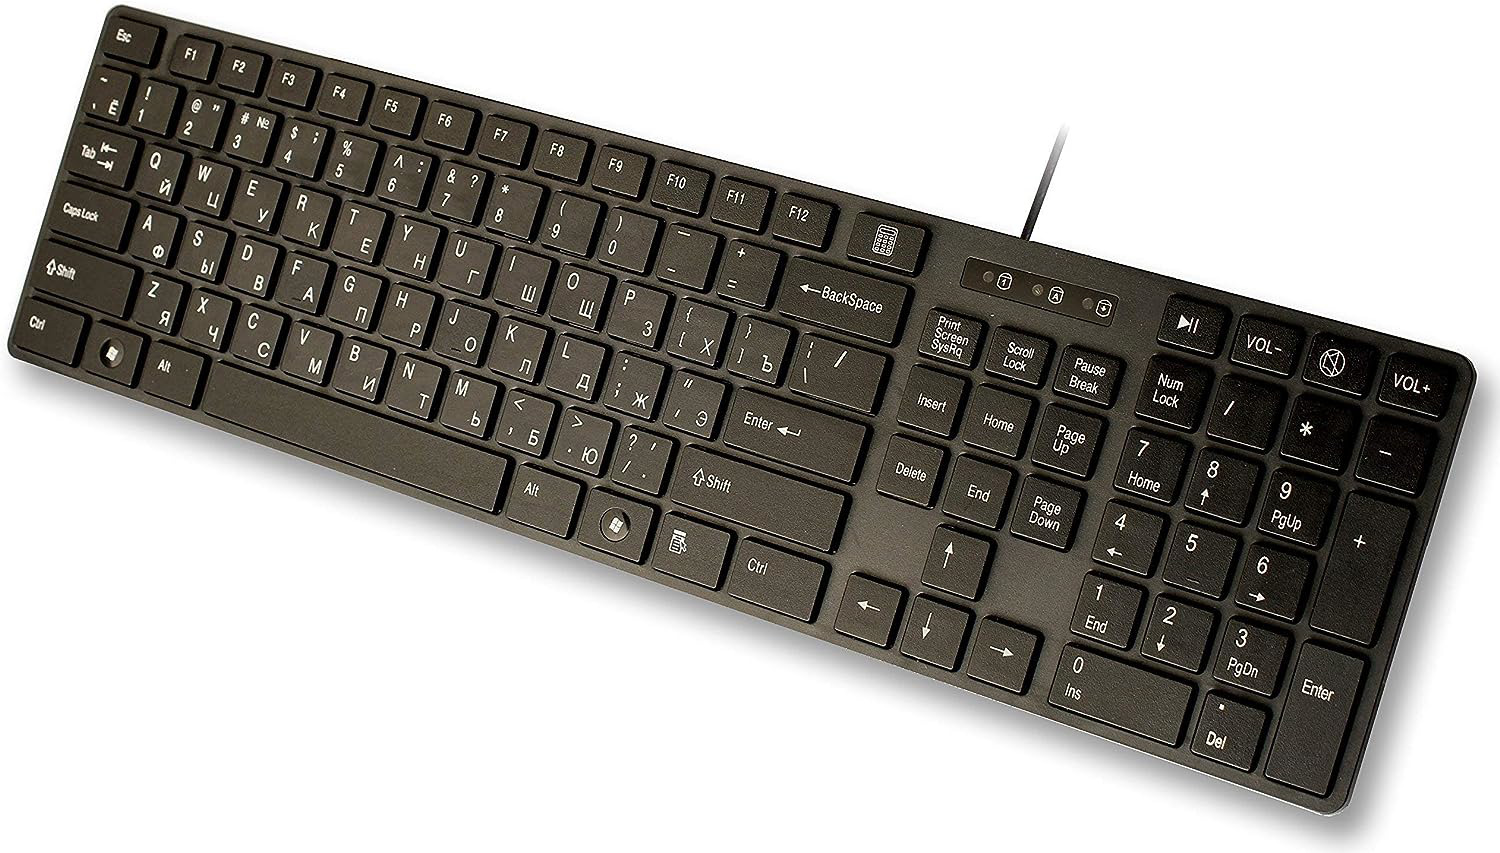 USB Keyboard with Russian English Cyrillic Letters/Characters- Full Size Slim